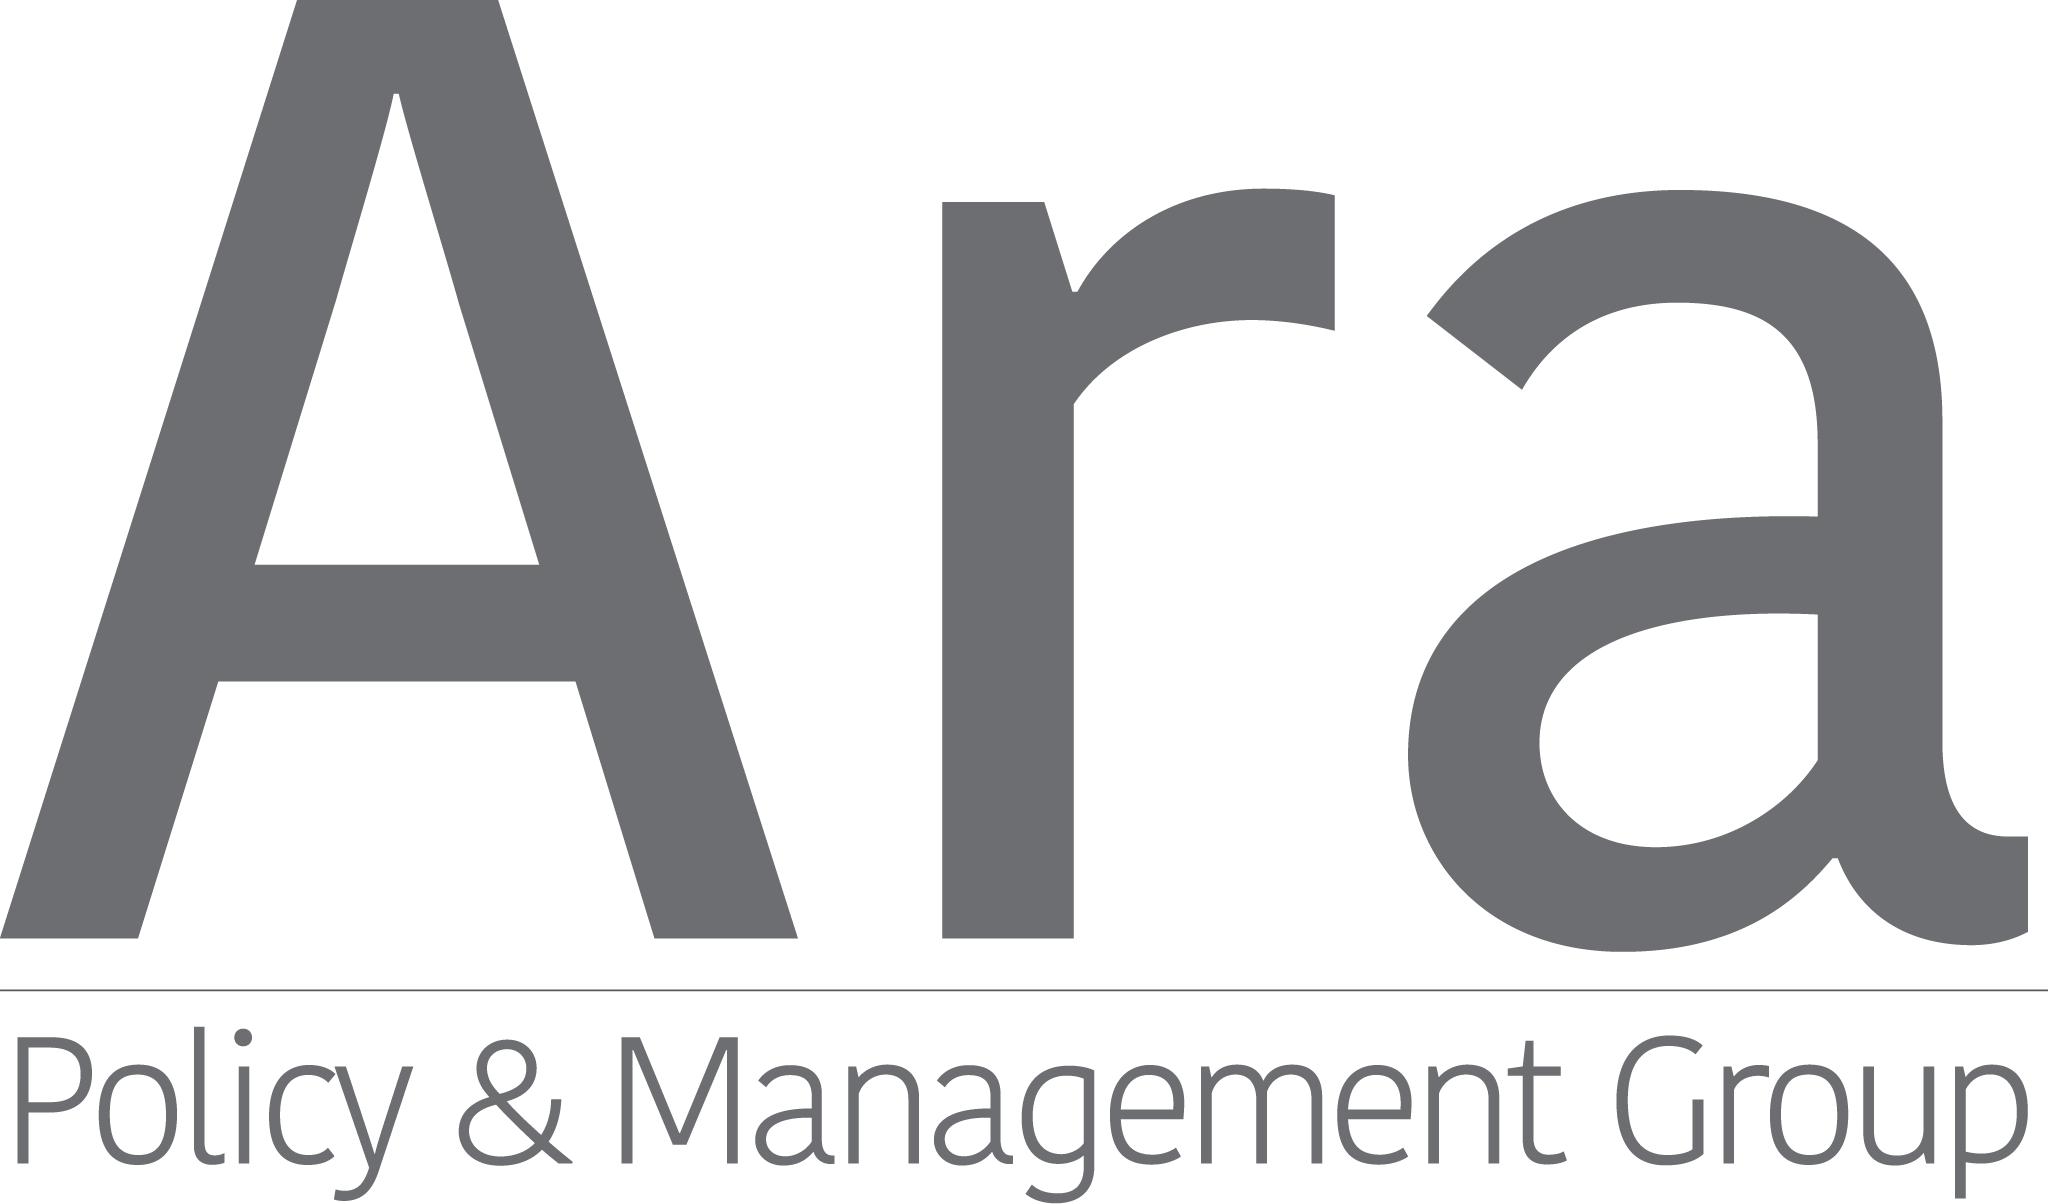 Logo of Ara Policy & Management Group